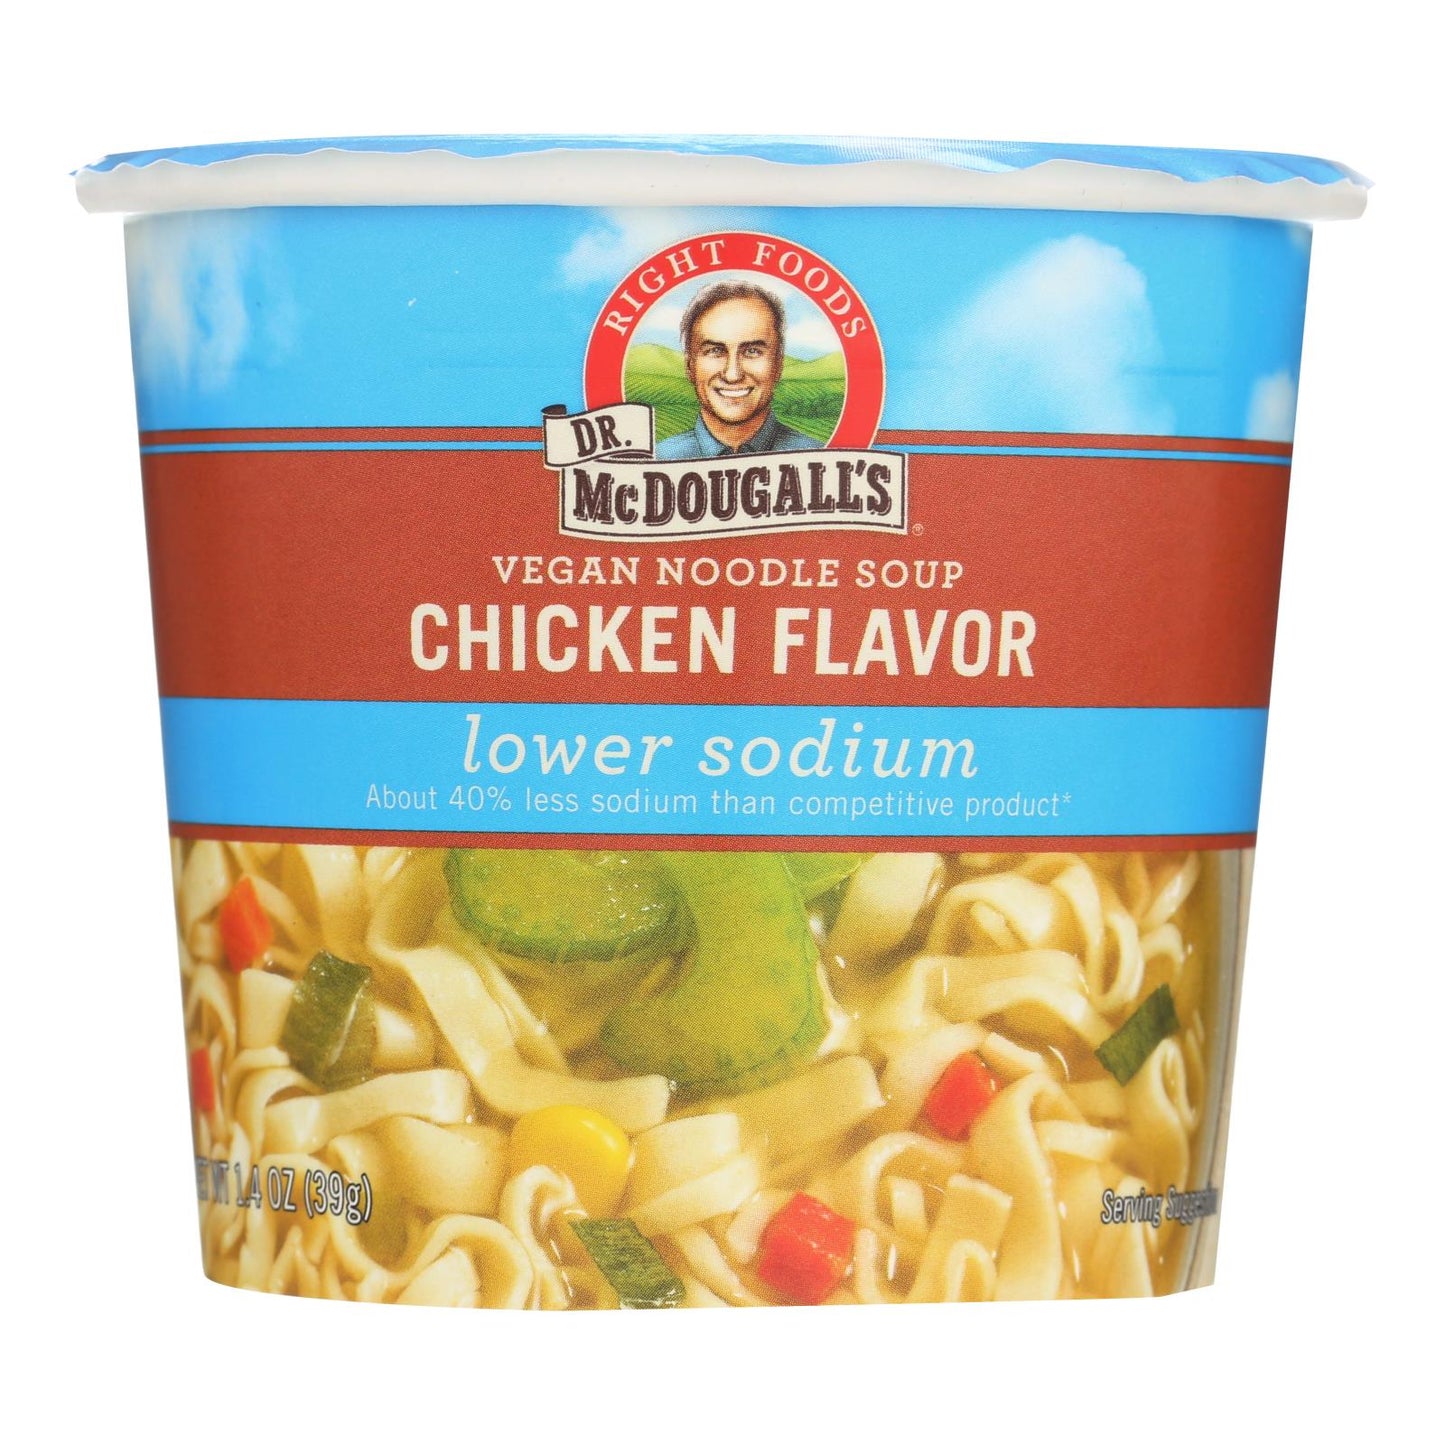 Dr. Mcdougall's Vegan Noodle Lower Sodium Soup Cup - Chicken - Case Of 6 - 1.4 Oz.